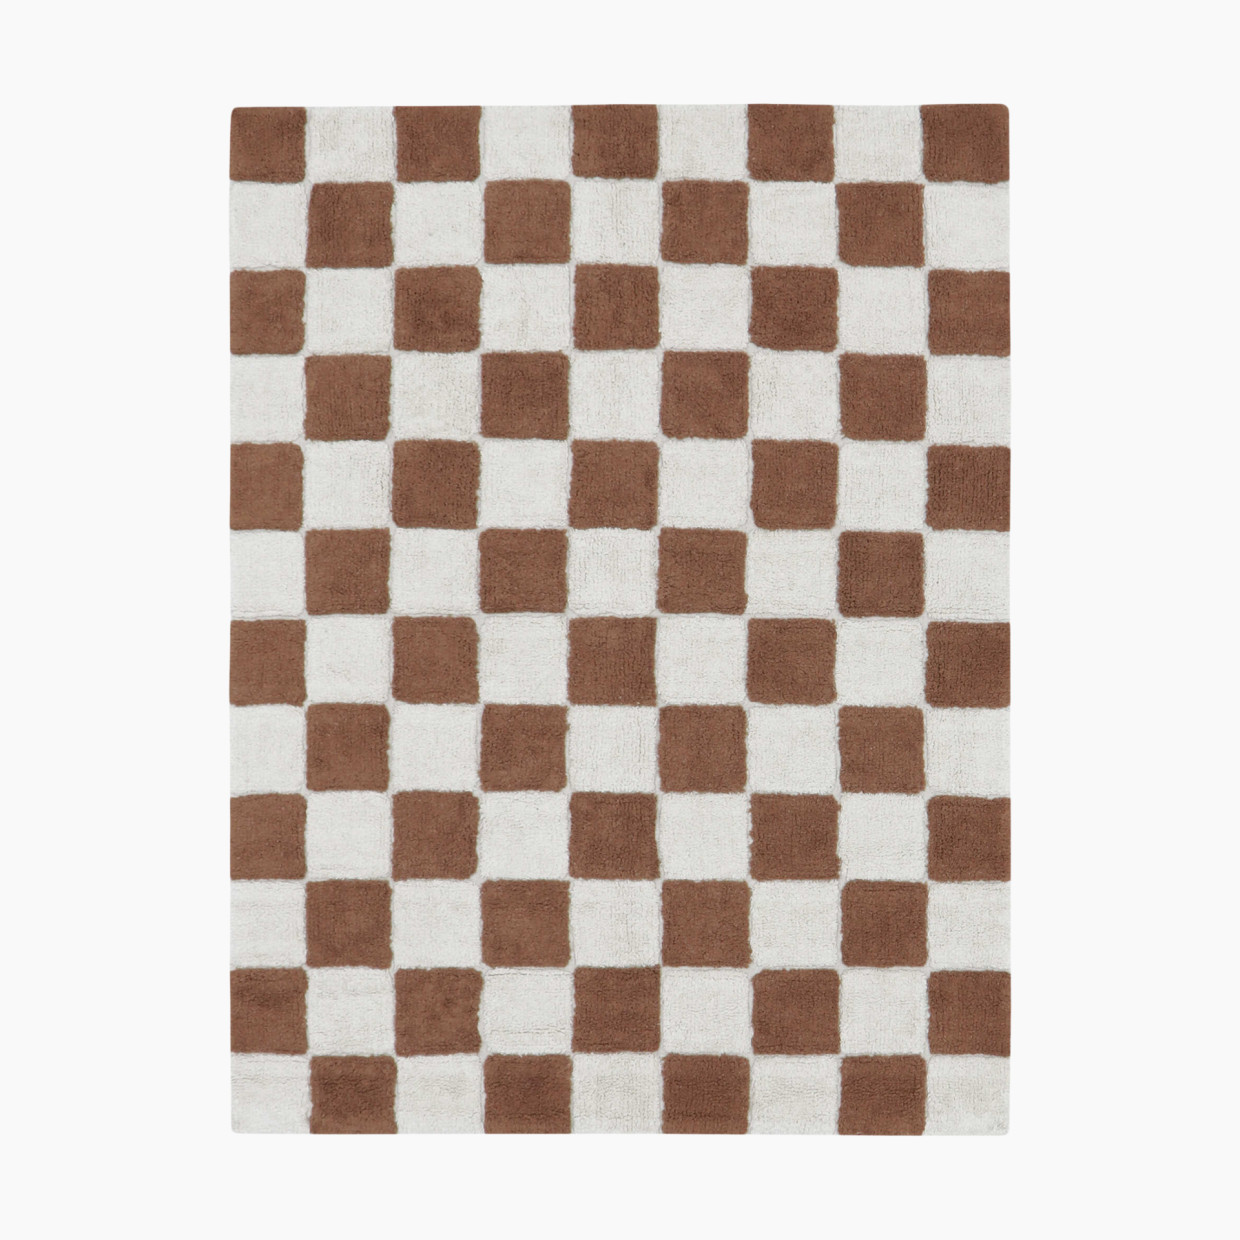 Lorena Canals Kitchen Tiles Washable Rug - Toffee, 4' X 5' 3".